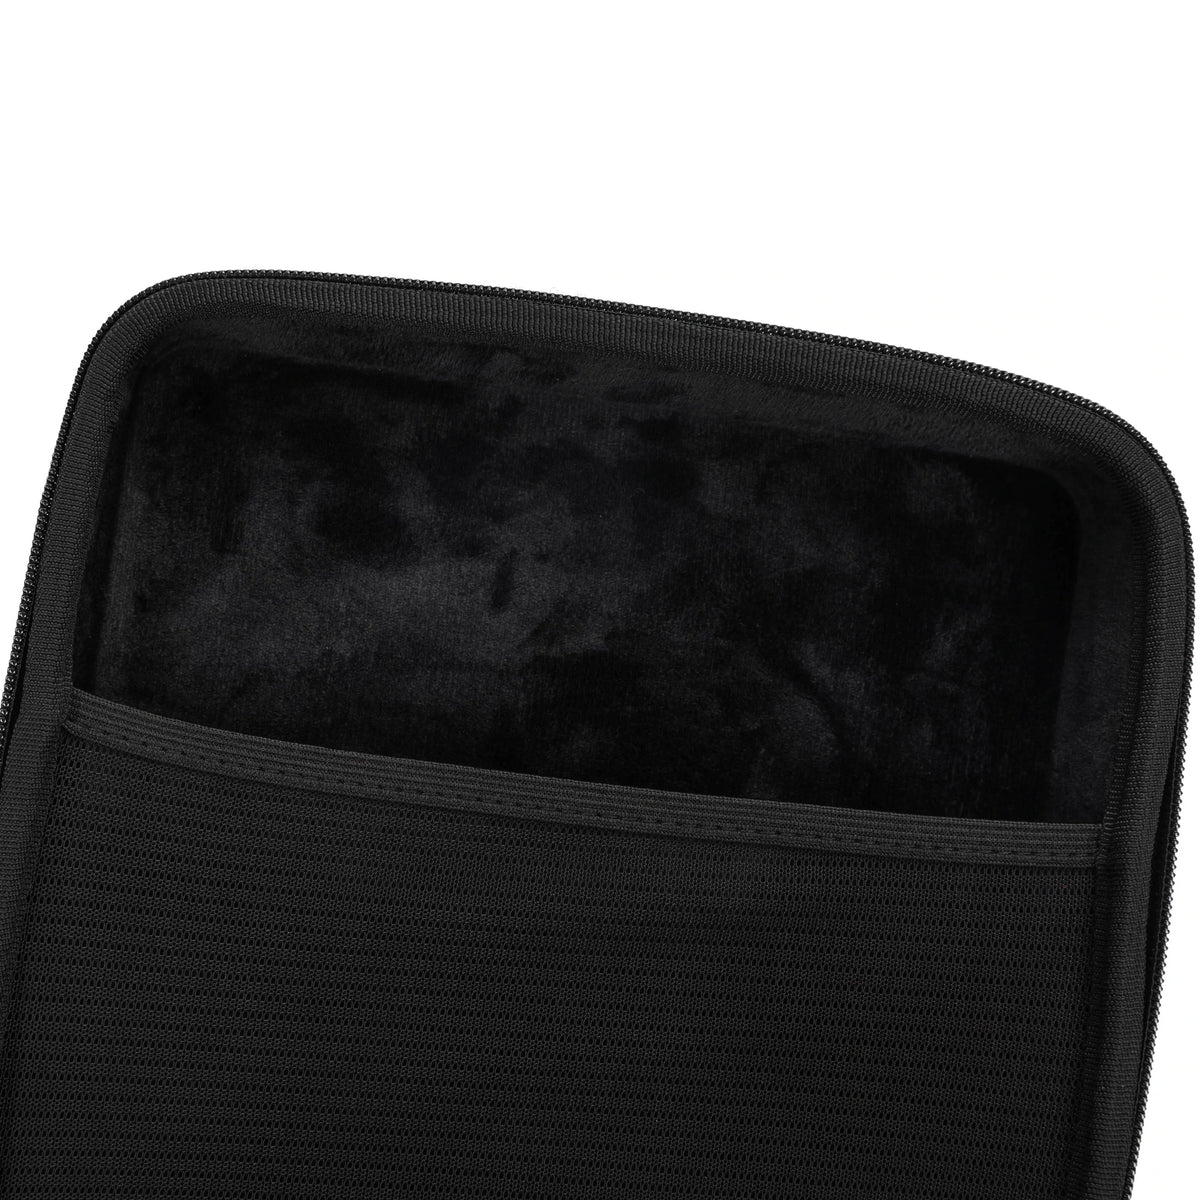 Analog Cases GLIDE Case For The Audio-Technica AT2035